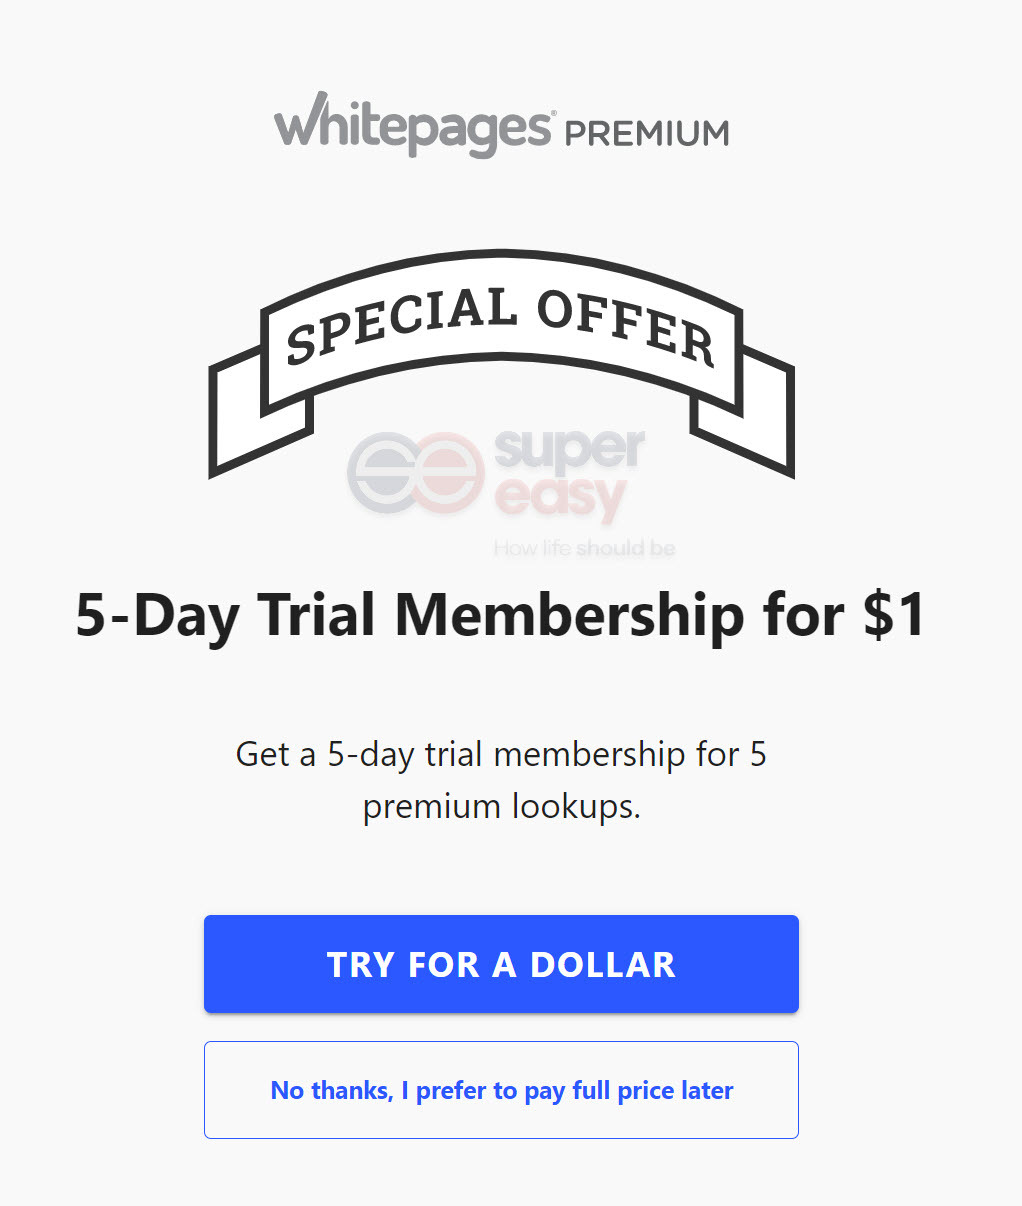 Whitepages 5-day Trial Membership For 1 dollar